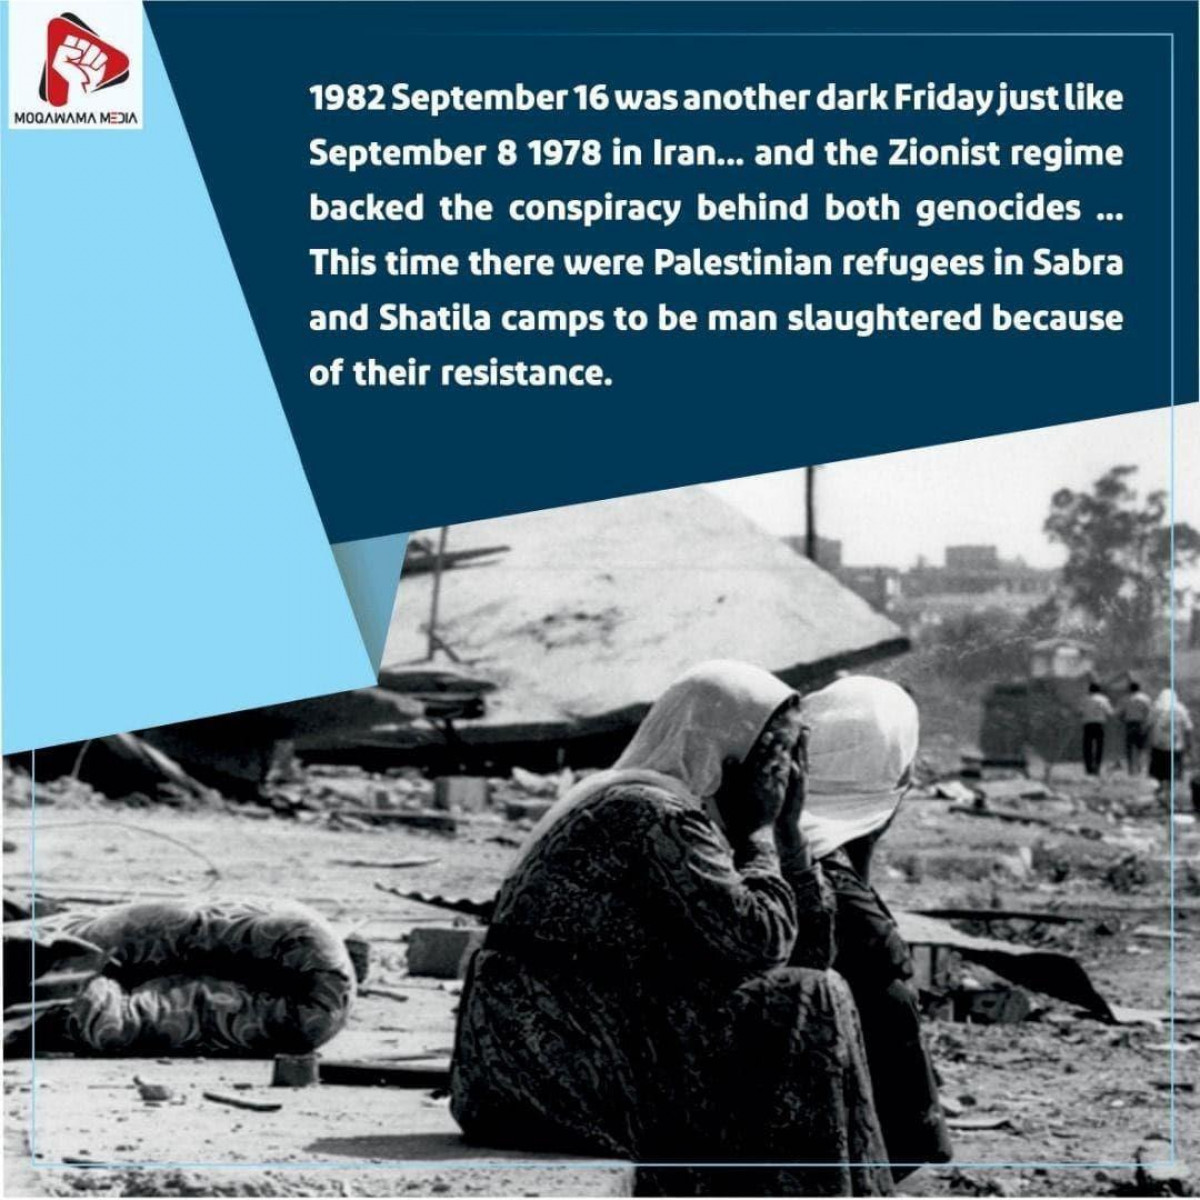 1982 September 16 was another dark Friday just like September 8 1978 in Iran...